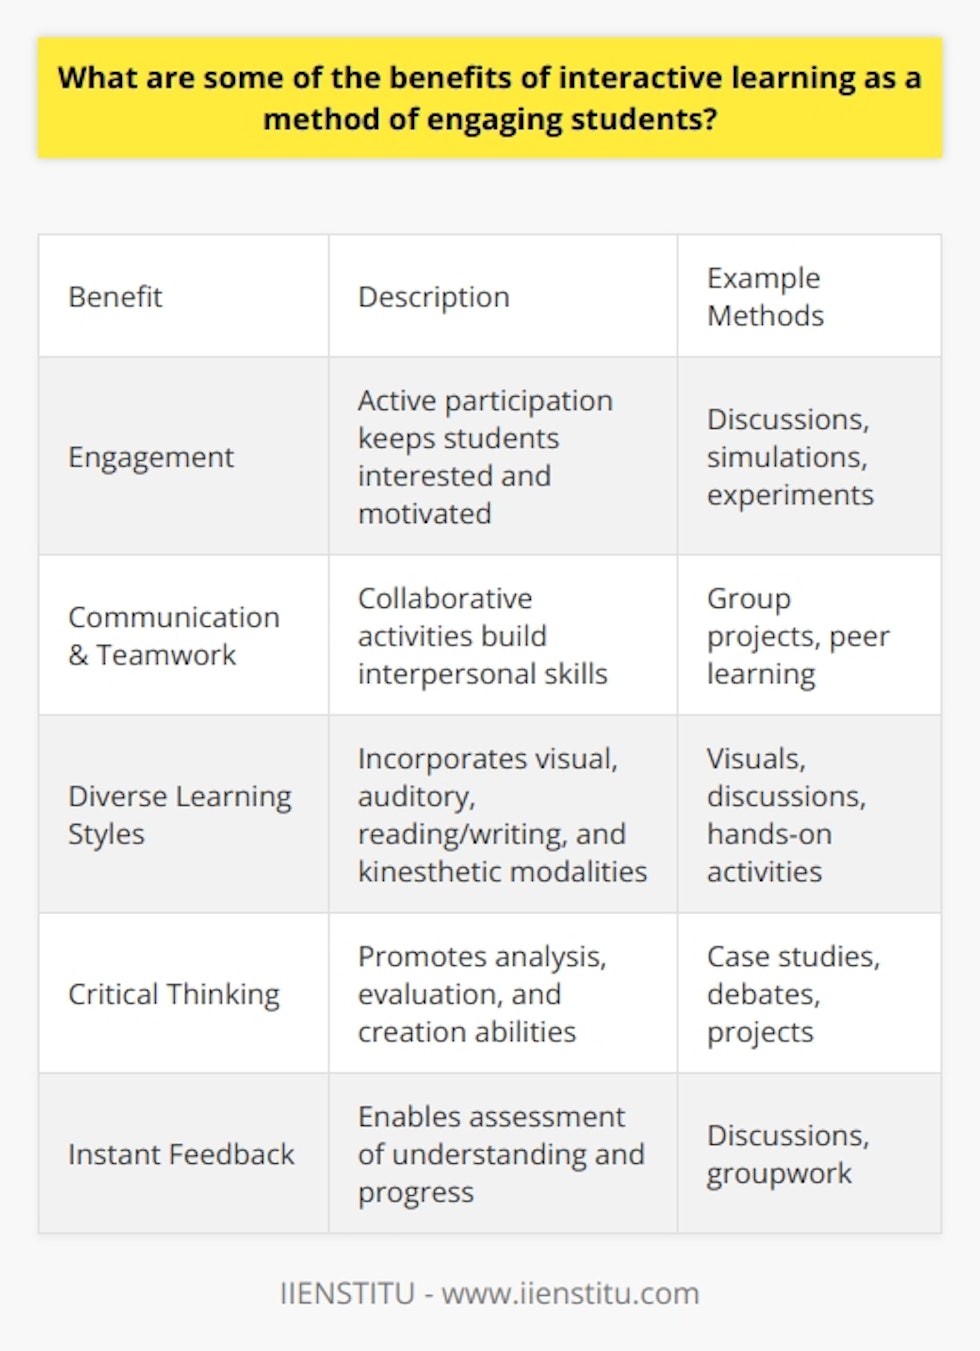 Here is a detailed content on the benefits of interactive learning for students:Engagement through Active ParticipationInteractive learning methods require students to actively participate in the learning process. This promotes engagement as students must pay attention, get involved, and contribute. Passively sitting through lectures can lead to boredom and lack of focus. Interactive techniques like discussions, simulations, experiments, and games get students actively thinking, speaking, and doing. This hands-on participation keeps students interested, motivated, and attentive.Enhanced Communication and Teamwork  Many interactive activities are collaborative in nature. Group projects, peer learning, discussions, and other cooperative tasks require communication, teamwork, and interpersonal skills. Students learn how to articulate thoughts, listen to diverse perspectives, provide constructive feedback, and resolve conflicts. Collaborative learning also allows students to learn from each other. Working together builds community and relationships among students.Appealing to Diverse Learning StylesPeople have different learning preferences based on visual, auditory, reading/writing, or kinesthetic styles. Lectures tend to favor auditory learners. Interactive methods incorporate multiple modalities so all students can engage through their strengths. Visuals, discussion, hands-on activities, and practice by doing appeal to diverse learning preferences. Developing Critical Thinking AbilitiesInteractive learning promotes higher-order thinking skills like analysis, evaluation, and creation. Case studies, debates, projects, and open-ended questions require students to apply, synthesize, and justify, rather than just remember. Developing these cognitive skills prepares students for real-world problem solving and independent learning.Providing Instant FeedbackInteractive learning enables ongoing assessment of student understanding. Through discussions, activities, and groupwork, instructors can gauge comprehension and provide immediate clarification and feedback. This allows students to improve in the moment. Instant feedback also helps students evaluate their own progress through self-reflection.Increasing Student SatisfactionResearch shows students have greater satisfaction and perceive larger learning gains with interactive methods. Students enjoy active participation more than passive listening. They also feel more confident in their abilities when they can demonstrate and apply knowledge through interactive tasks. This boosts motivation to learn.In summary, interactive techniques offer many benefits over traditional lecture by promoting active engagement, developing key skills like communication and critical thinking, appealing to diverse learners, providing instant feedback, and increasing student satisfaction. Incorporating interactivity is an effective way to actively involve students in the learning process.